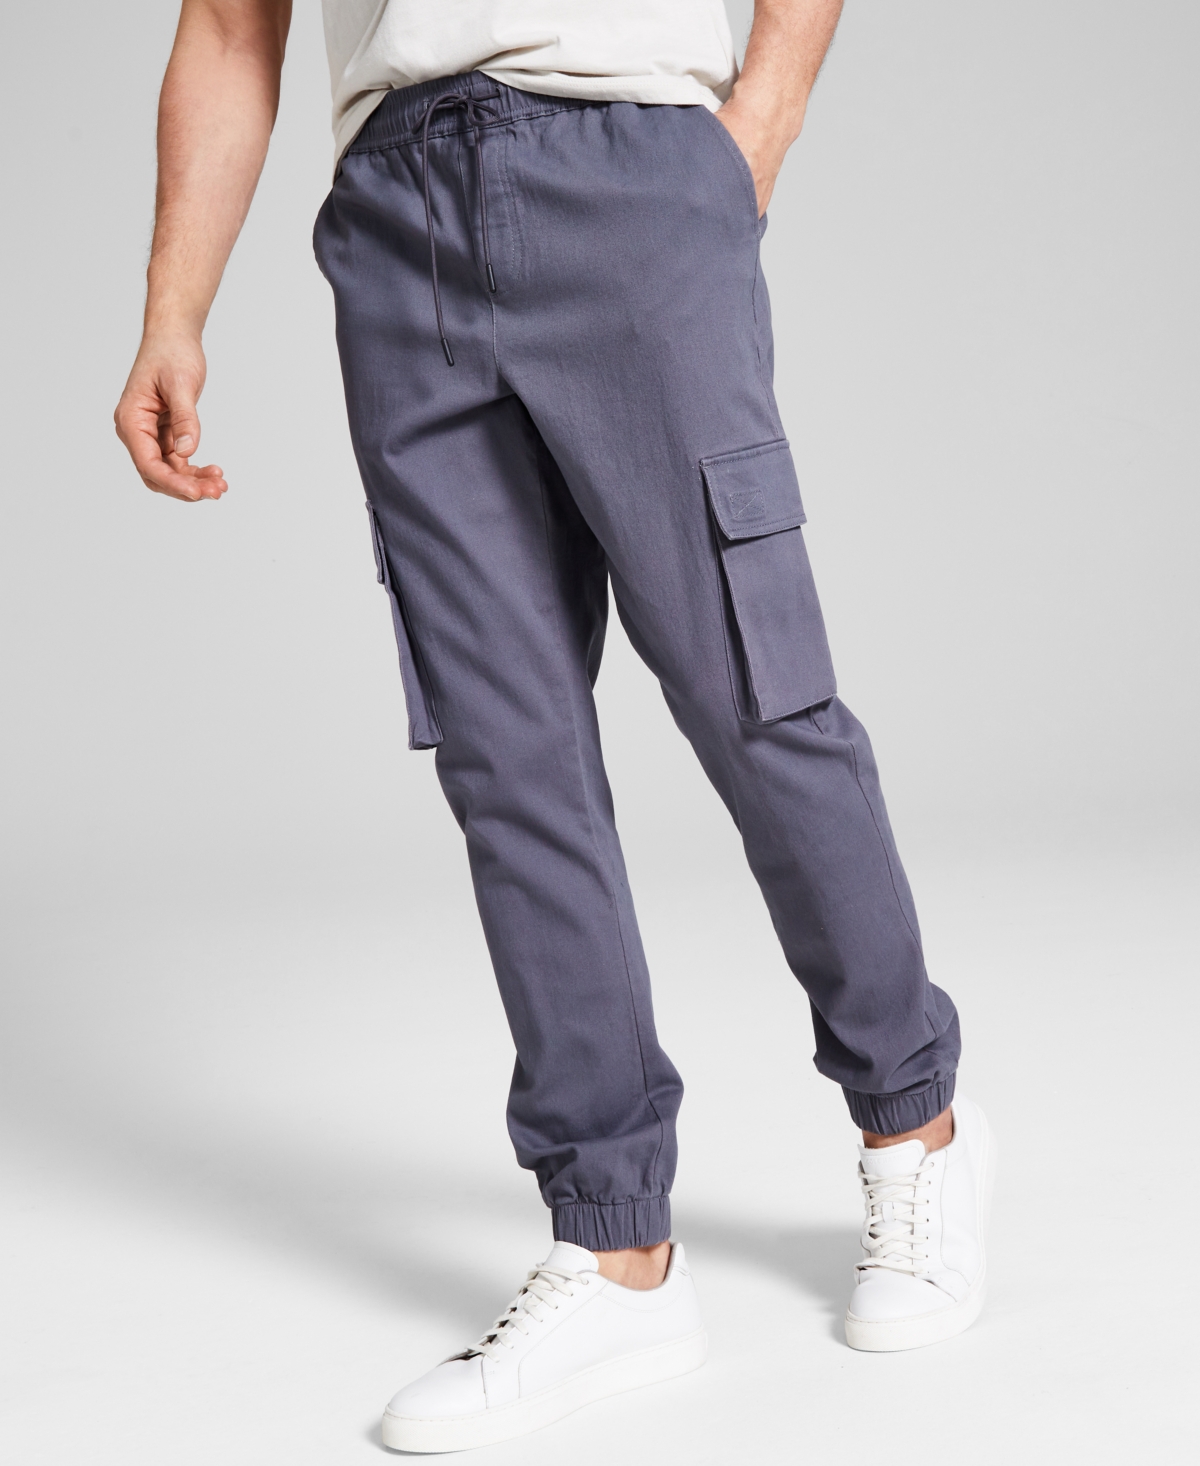 And Now This Men's Twill Cargo Pant In Charcoal